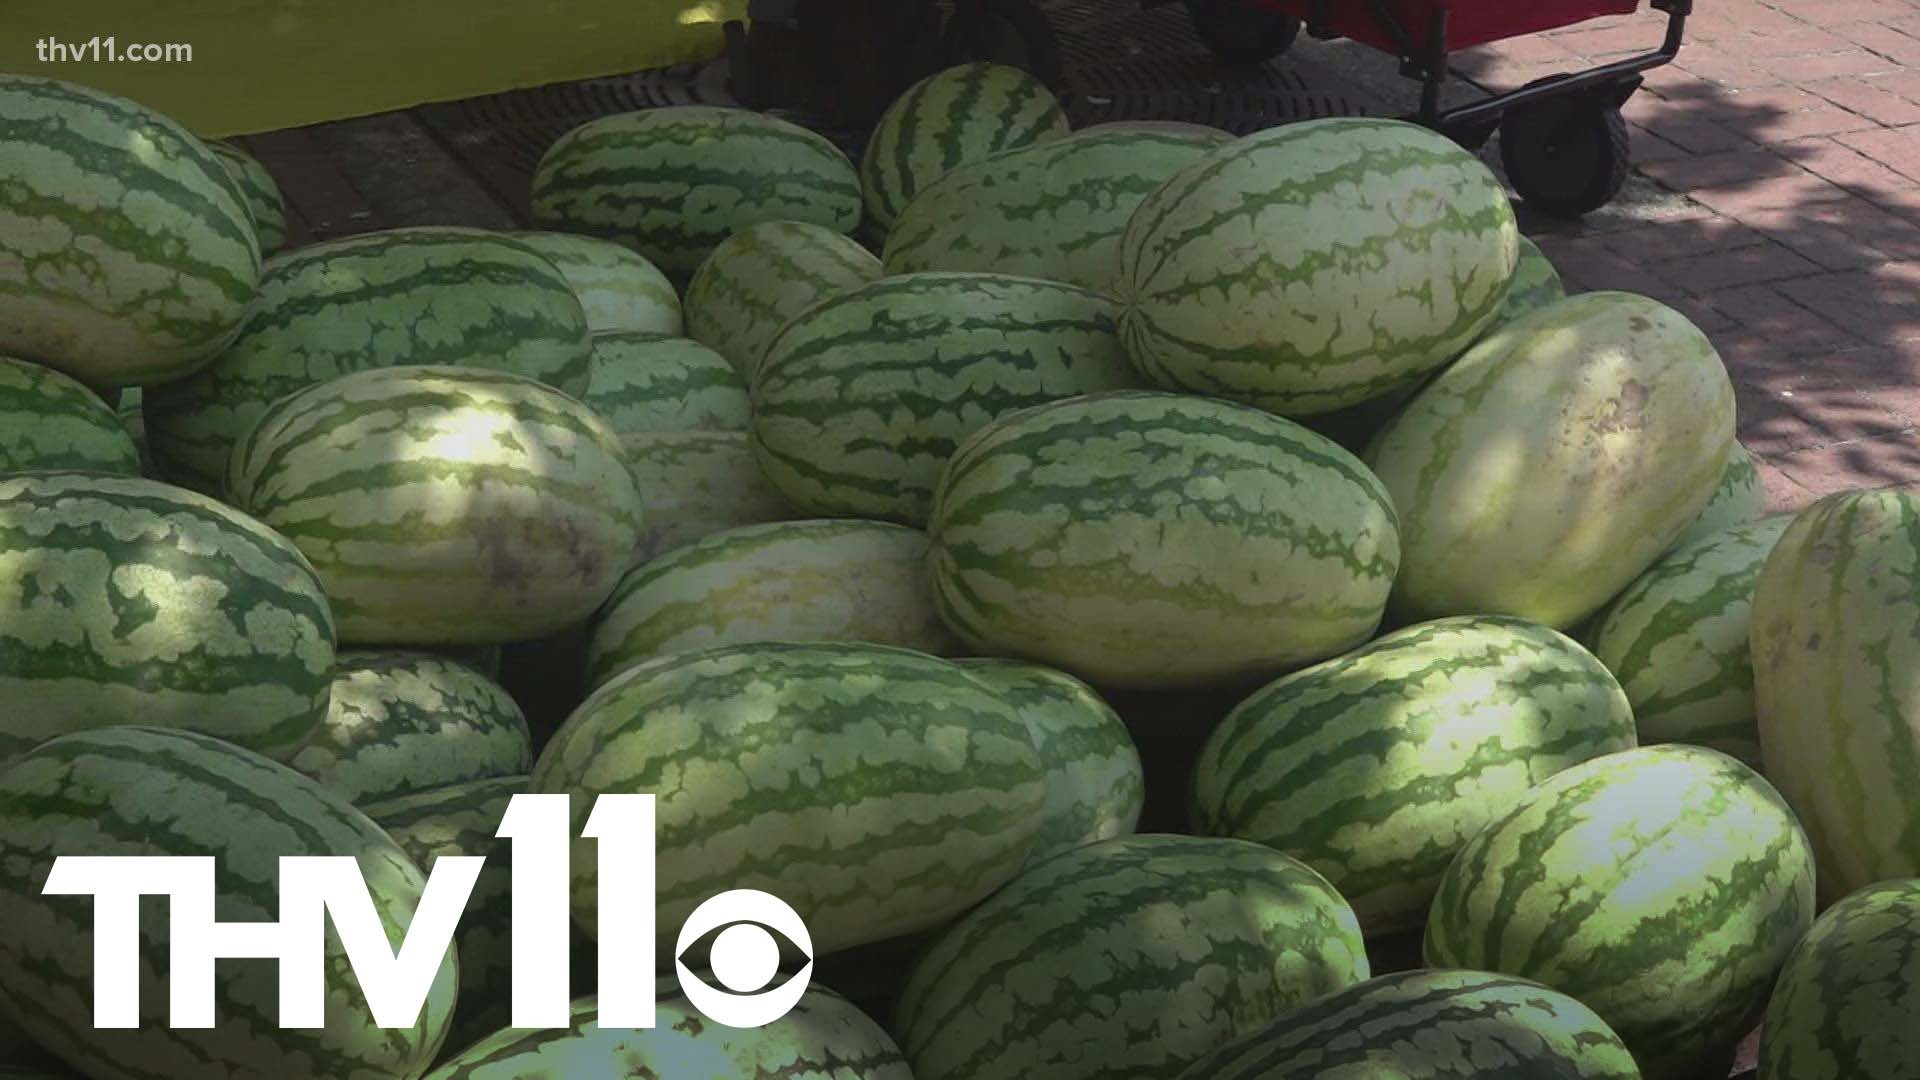 Farmers are taking advantage of the heat— since it's actually the ideal condition for growing watermelons.